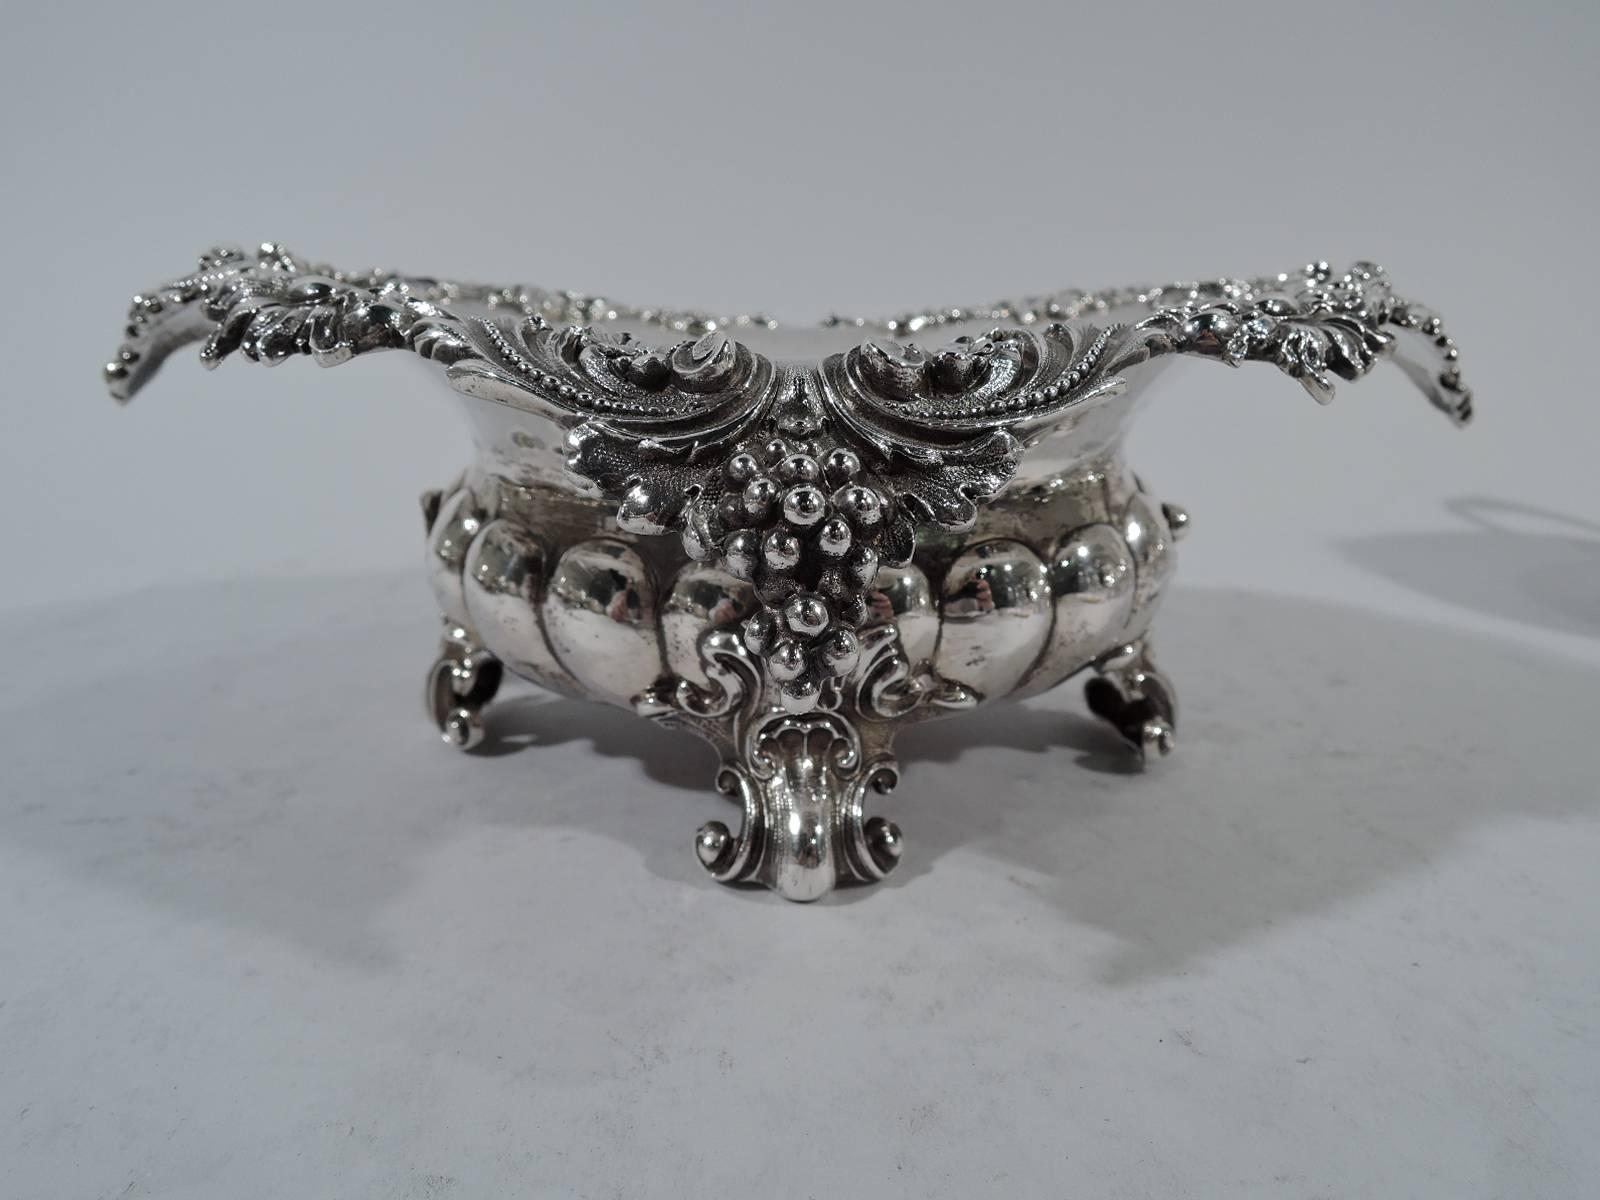 Pair of fancy sterling silver bowls. Made by Mauser in New York, circa 1890. Each: Lobed and bellied bowl on four leaf-mounted volute scrolls. Raised and turned-down quatrefoil rim with applied scrolls, flowers, and grape bunches. Hallmarked. Total